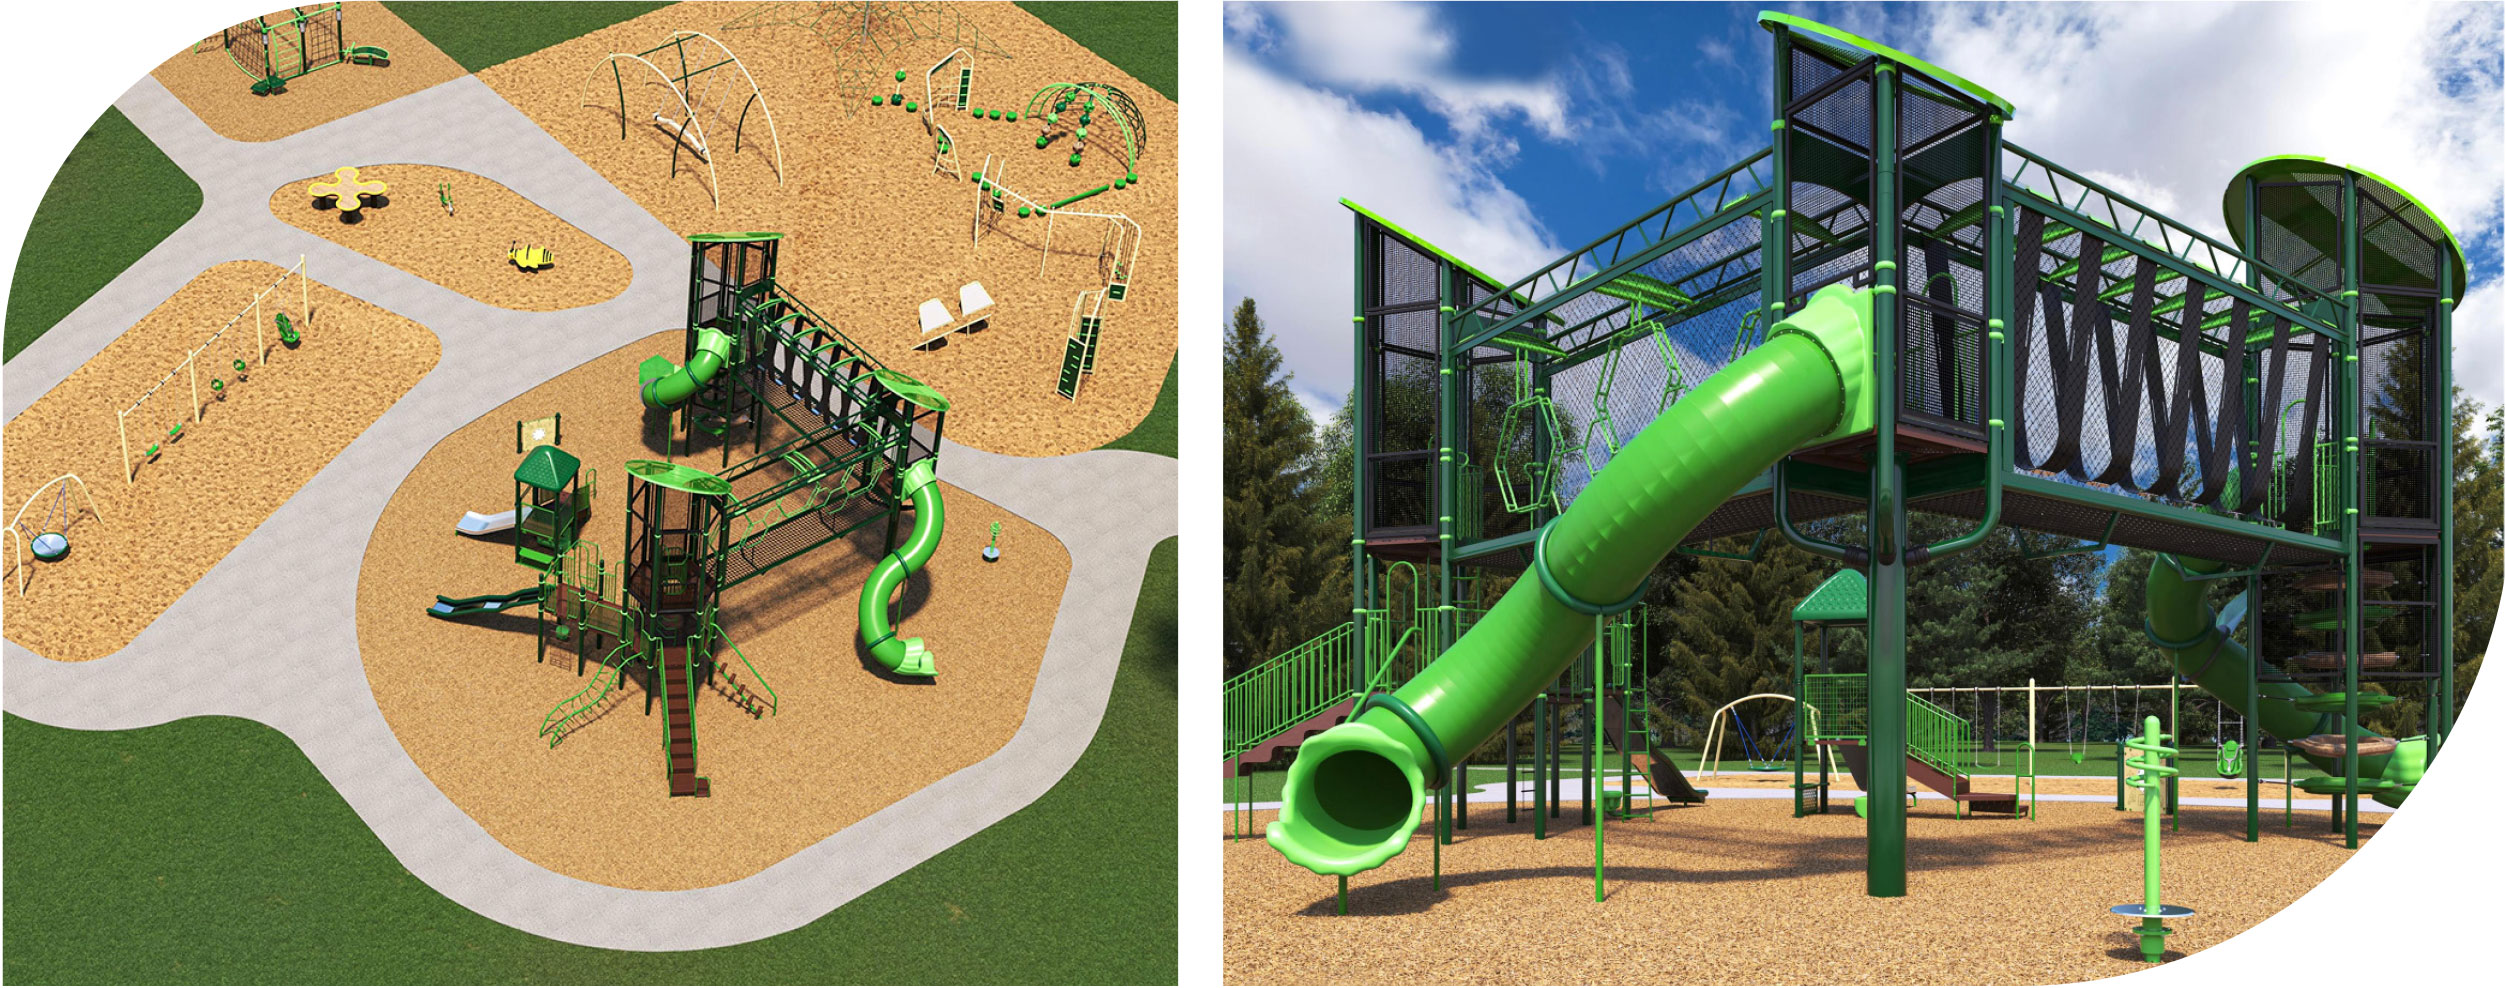 The Rotary Adventure Park Project Highlights